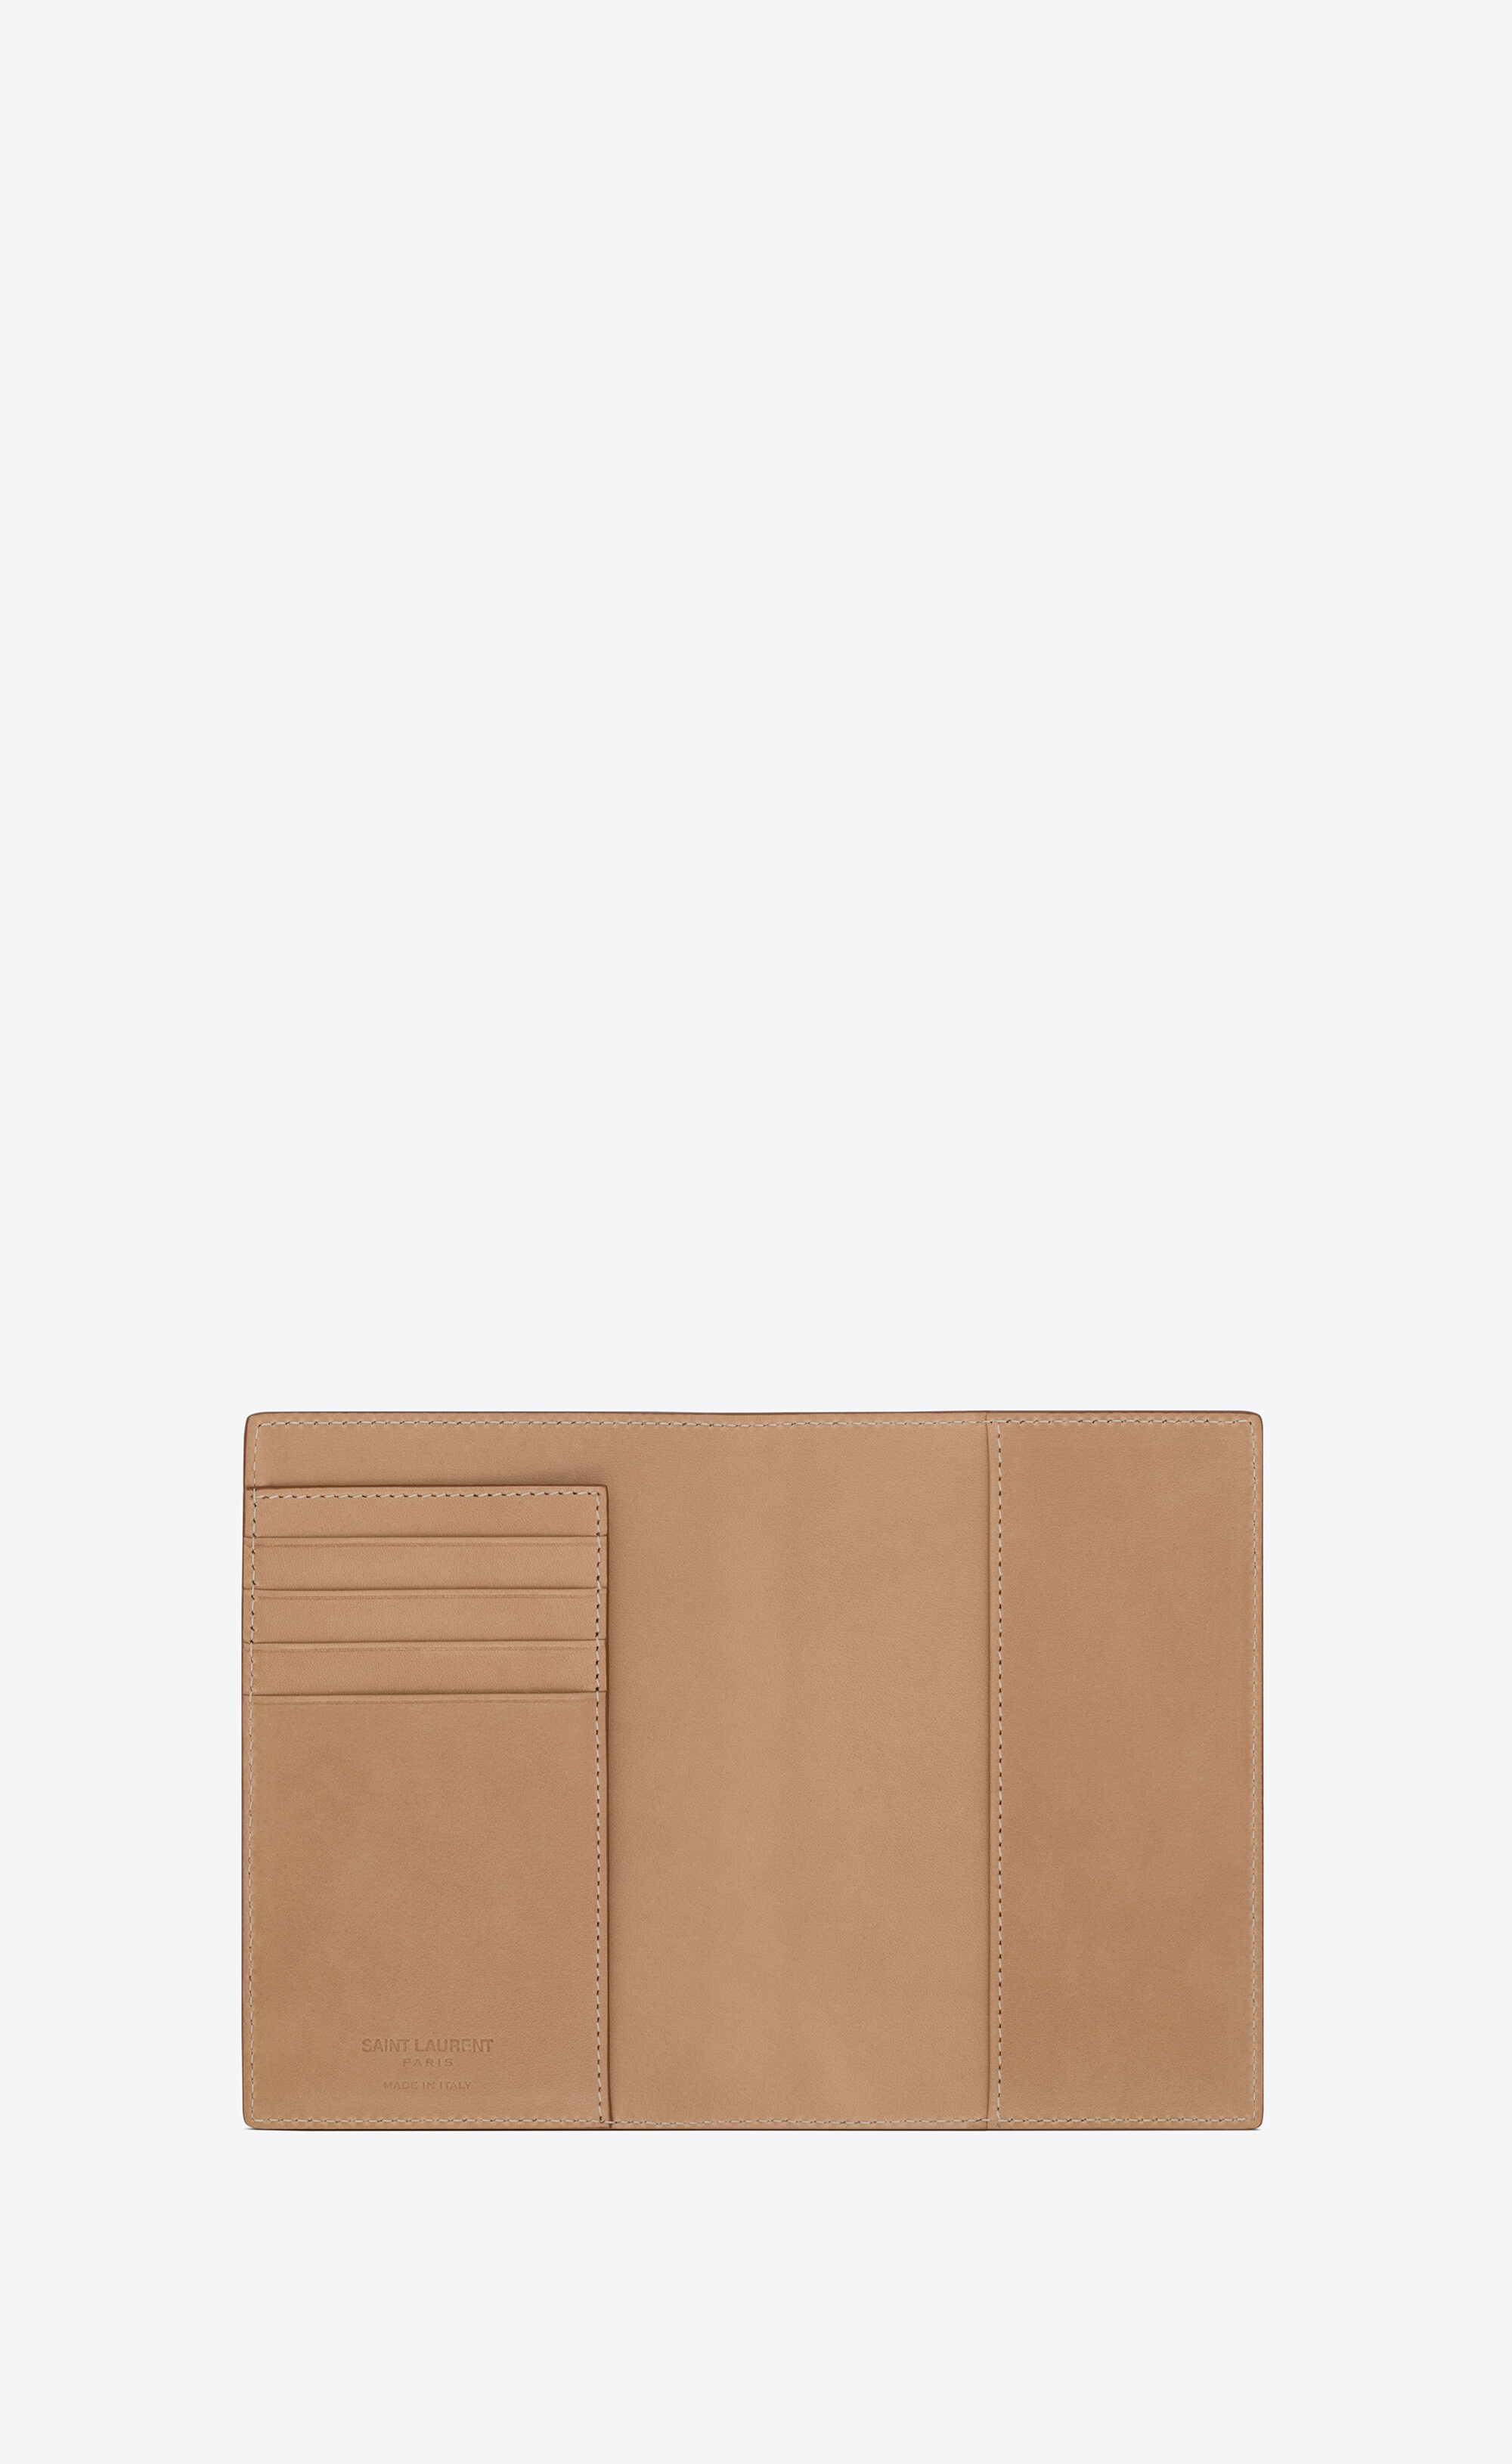 saint laurent passport case in vegetable-tanned leather - 4